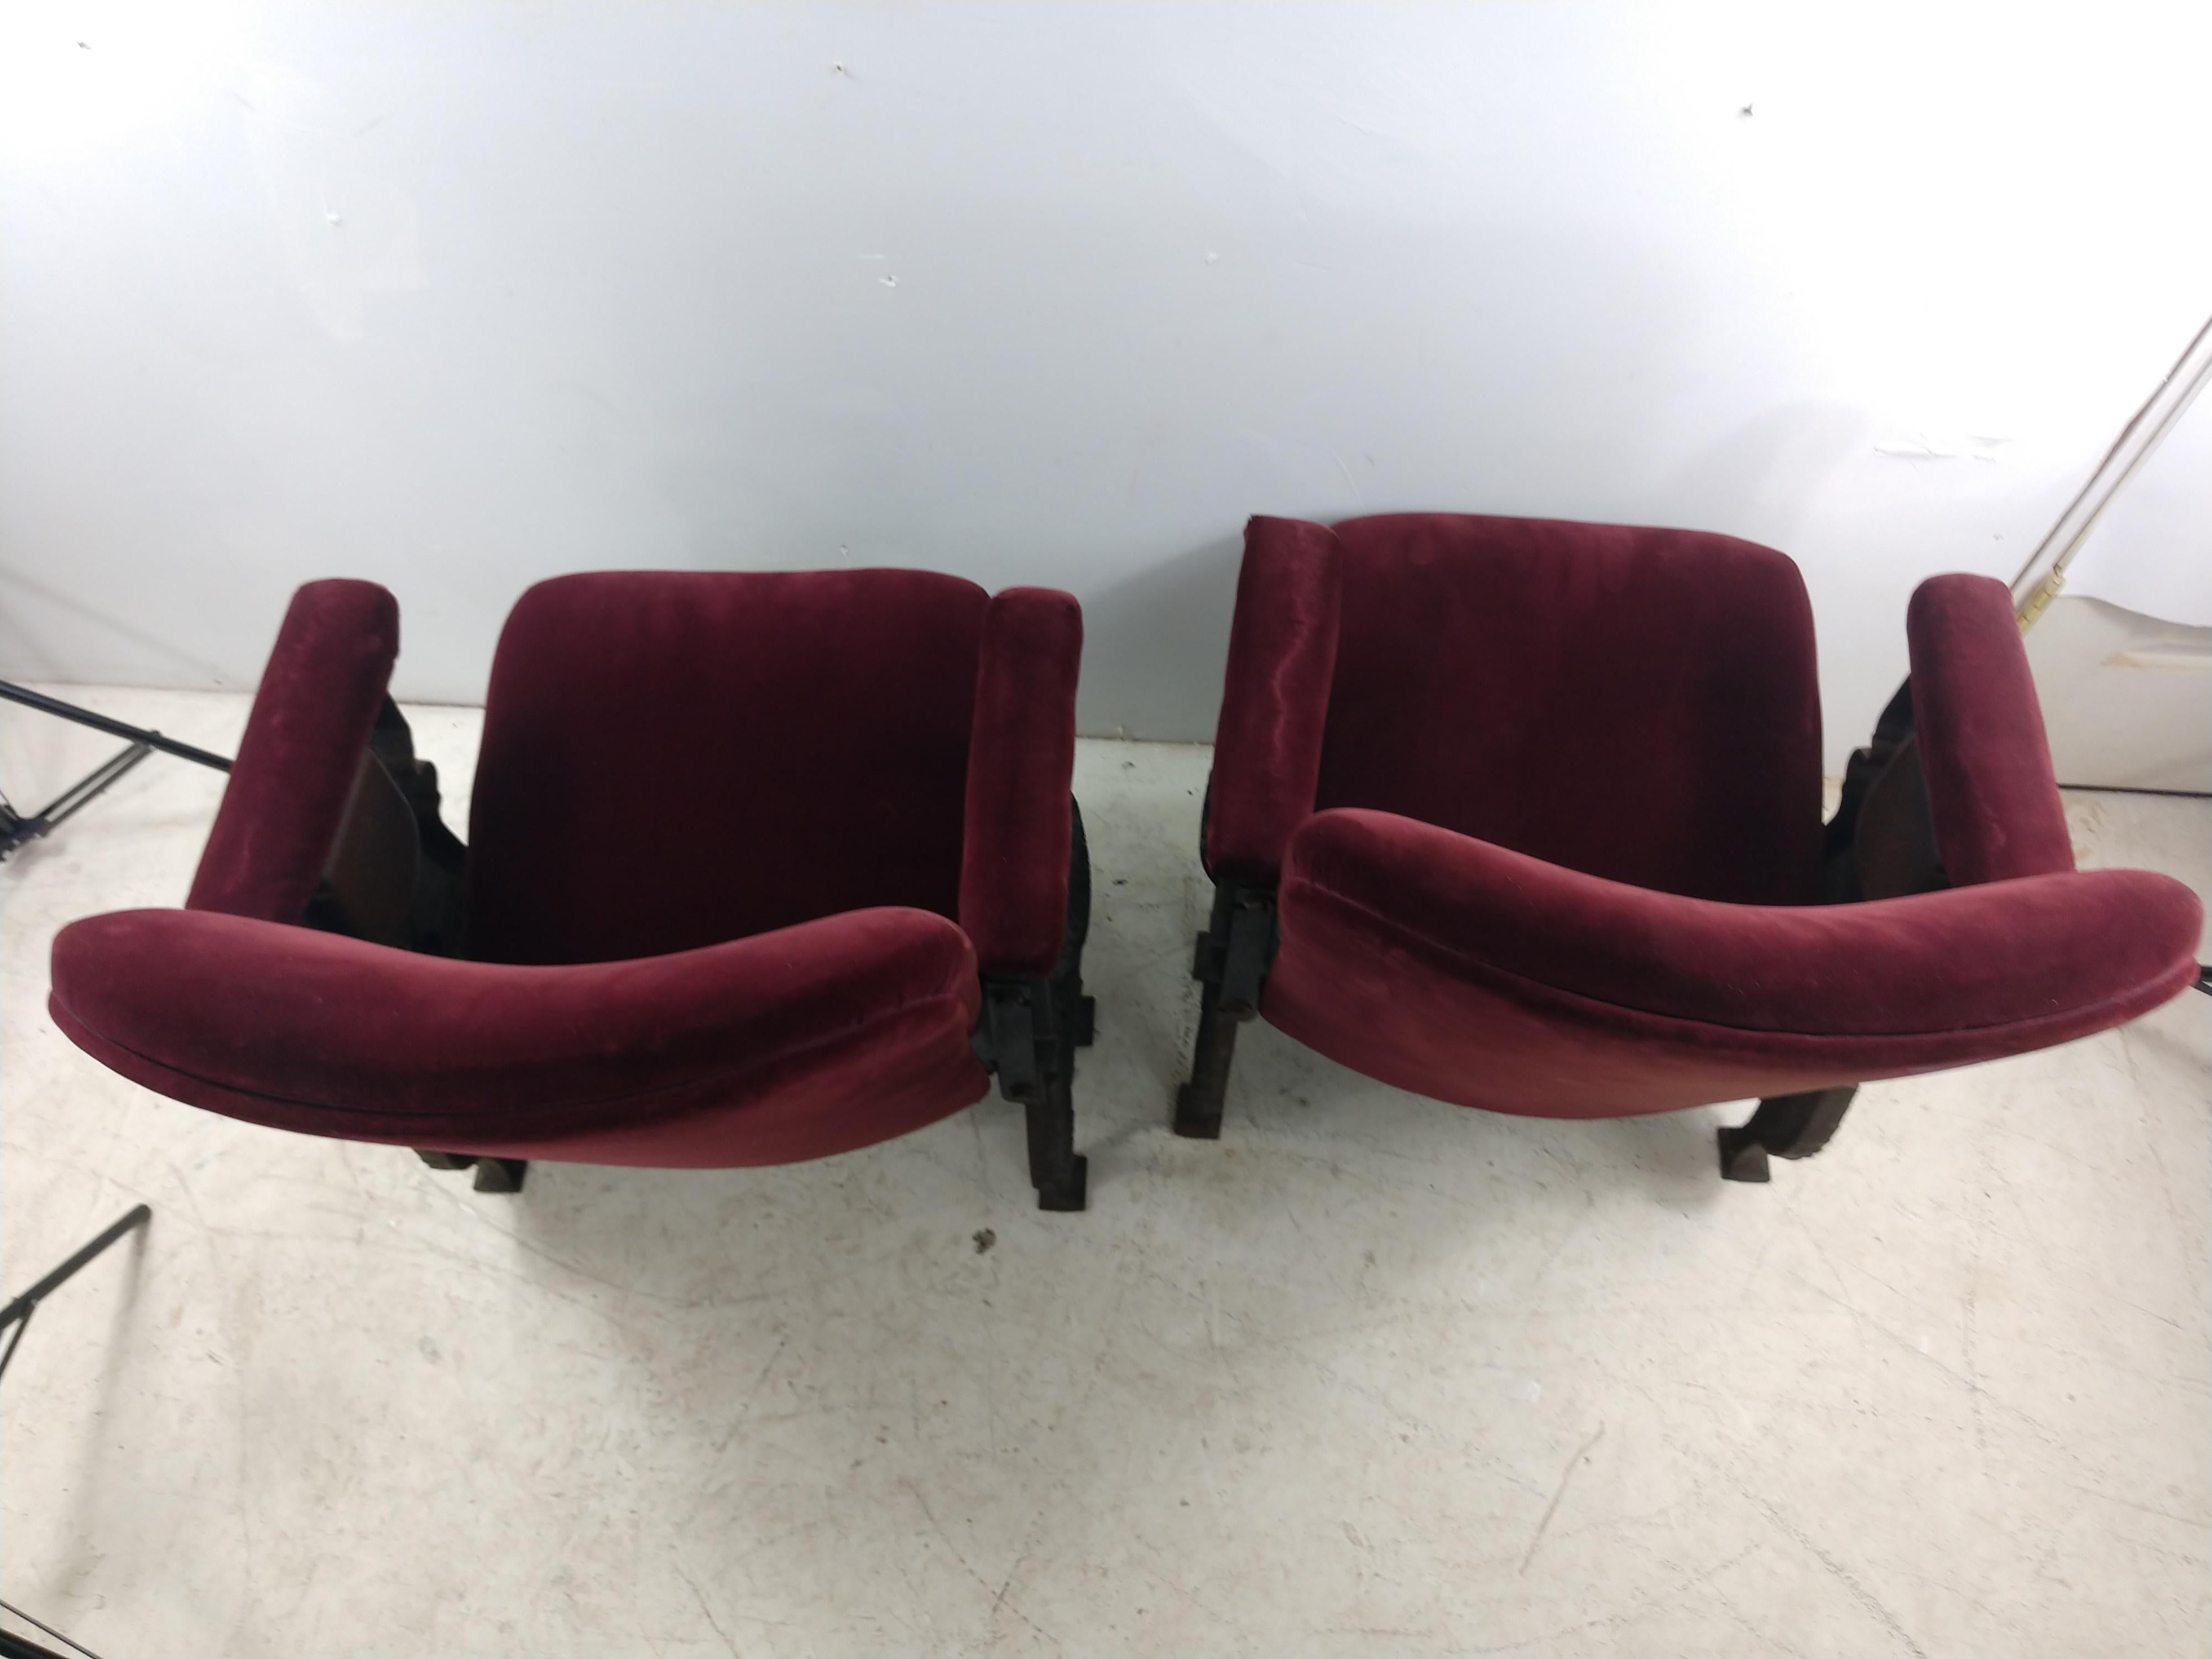 Fabulous set of two cast iron with patinated sides. Made by the American Seating Co in 1927 for a NYC Theatre which was renovated 40 yrs ago. Chairs are separate with castings on both sides and likely cane from a balcony loge section. In excellent